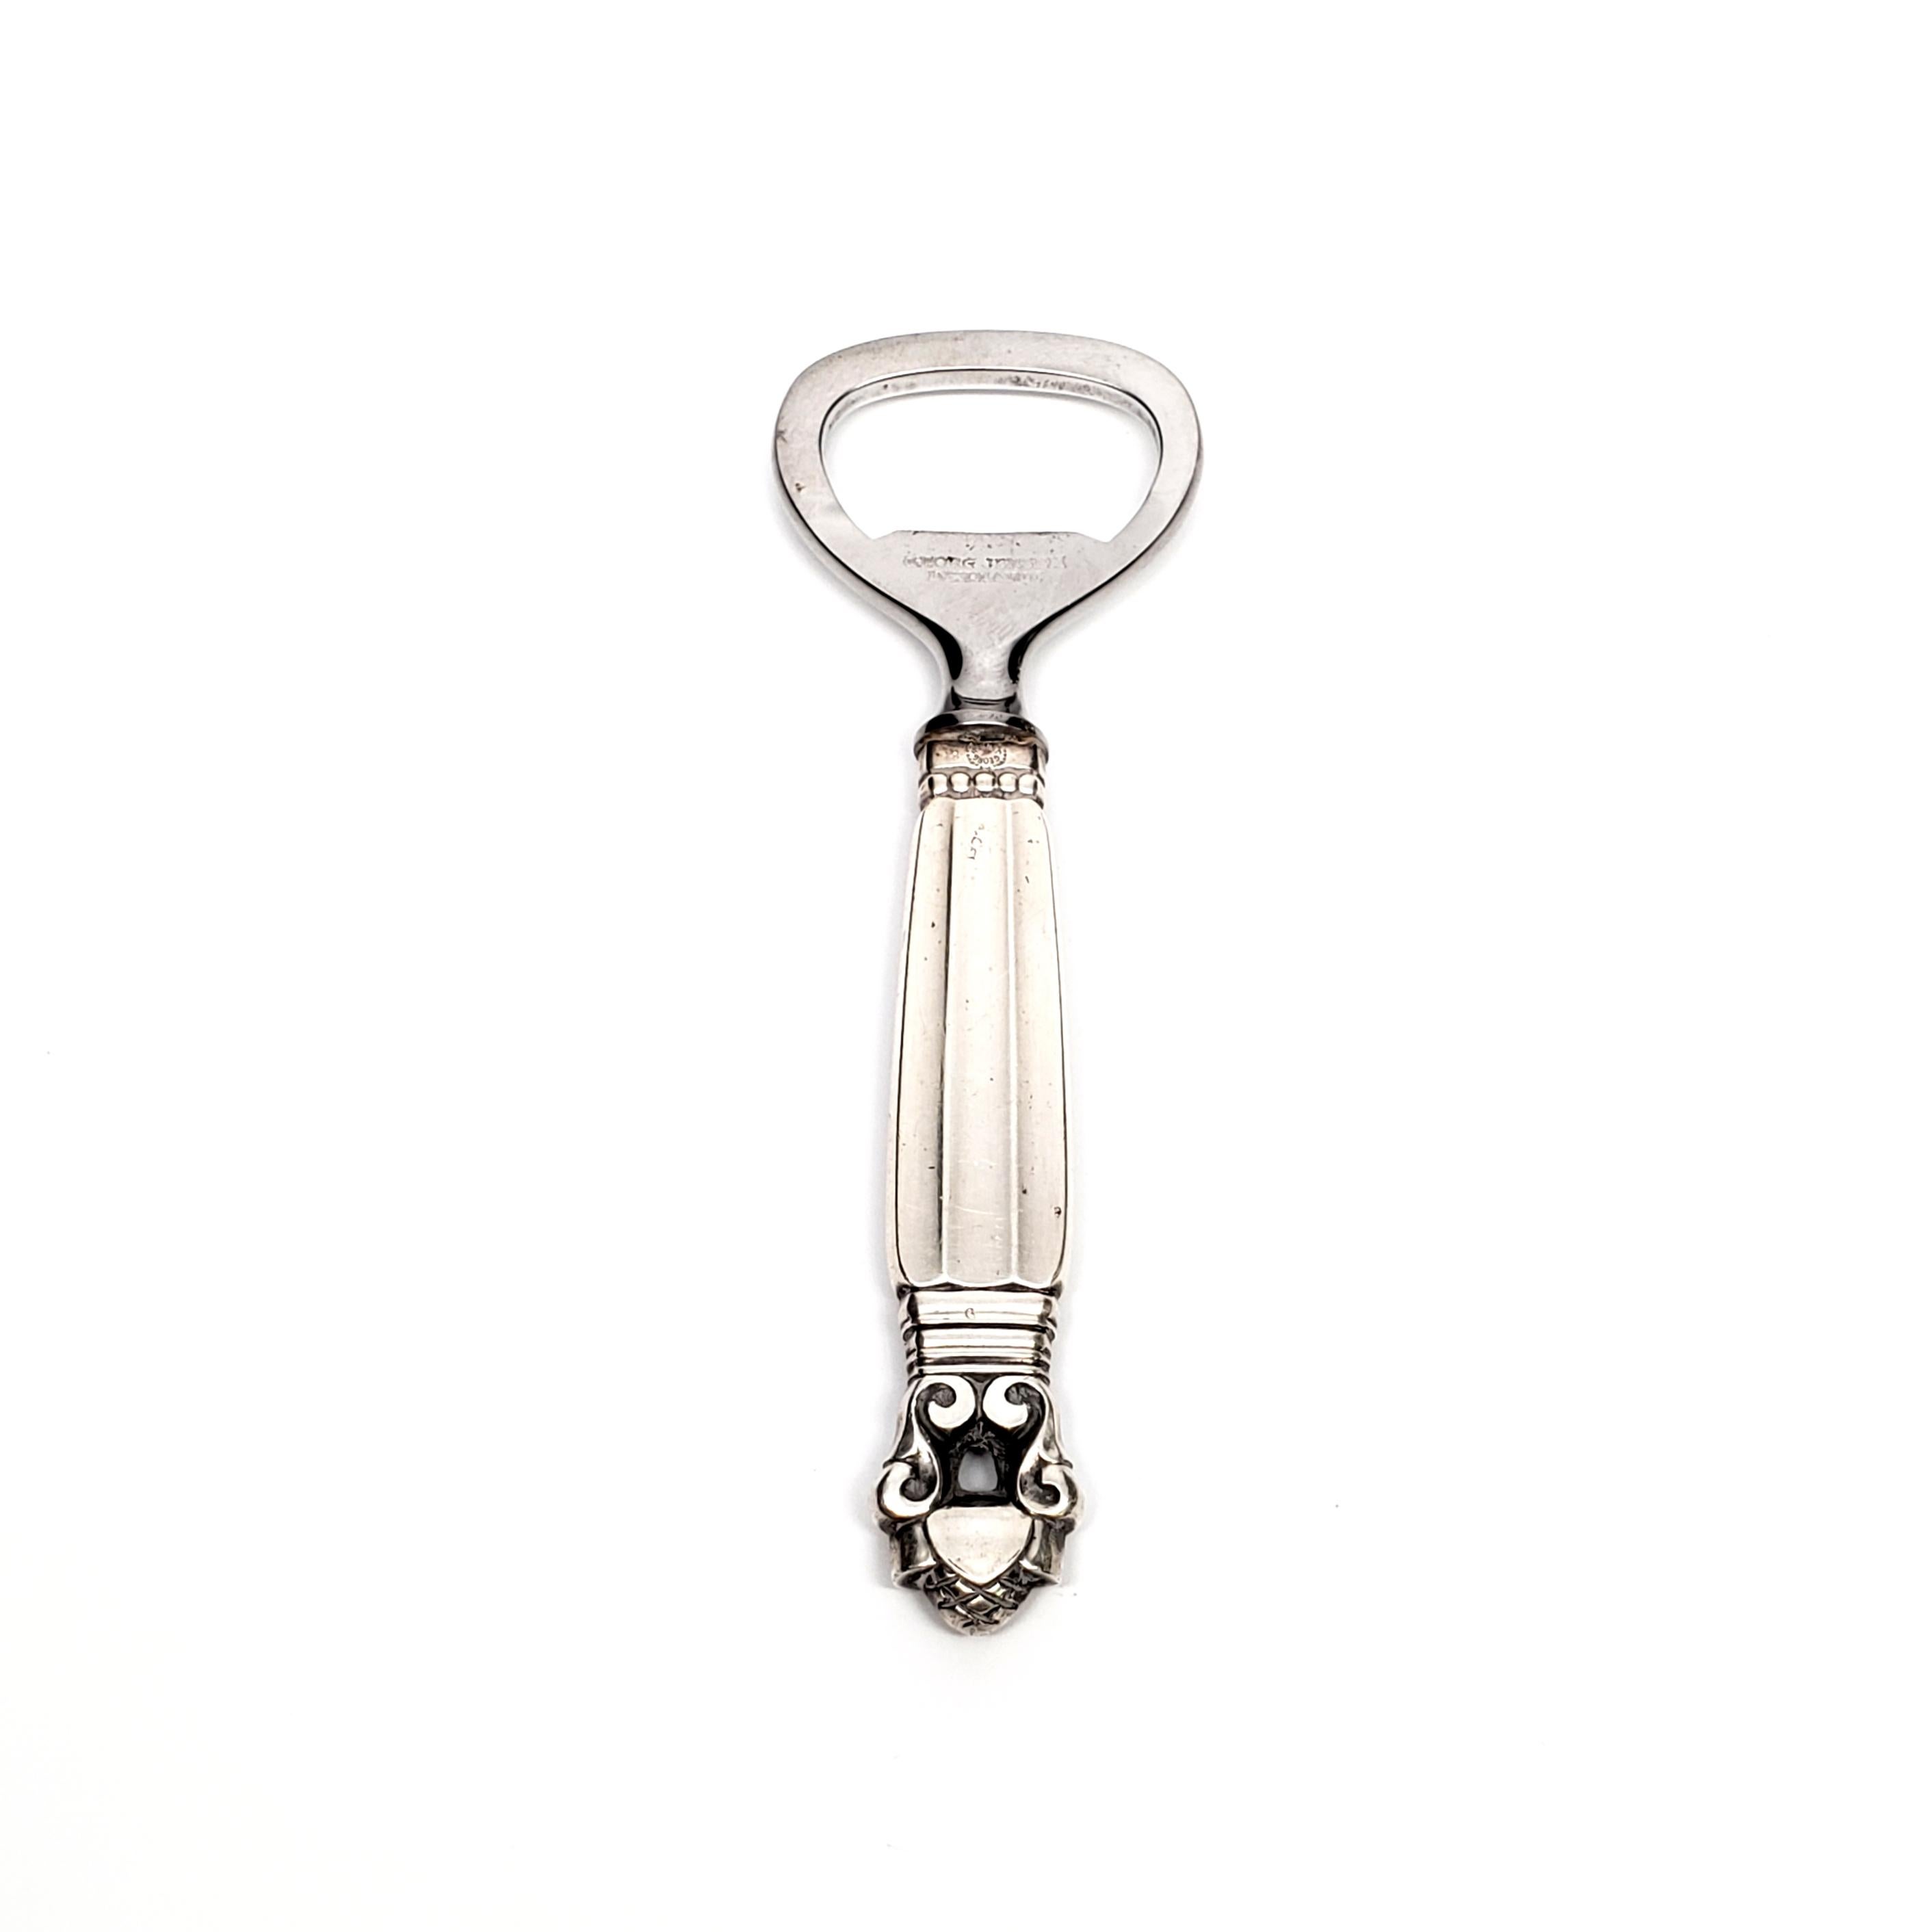 Sterling silver handle bottle opener with stainless implement from Georg Jensen in the Acorn pattern.

The Acorn pattern was introduced in 1915 as a collaboration between Georg Jensen and designer Johan Ronde. The Acorn pattern, which combines Art